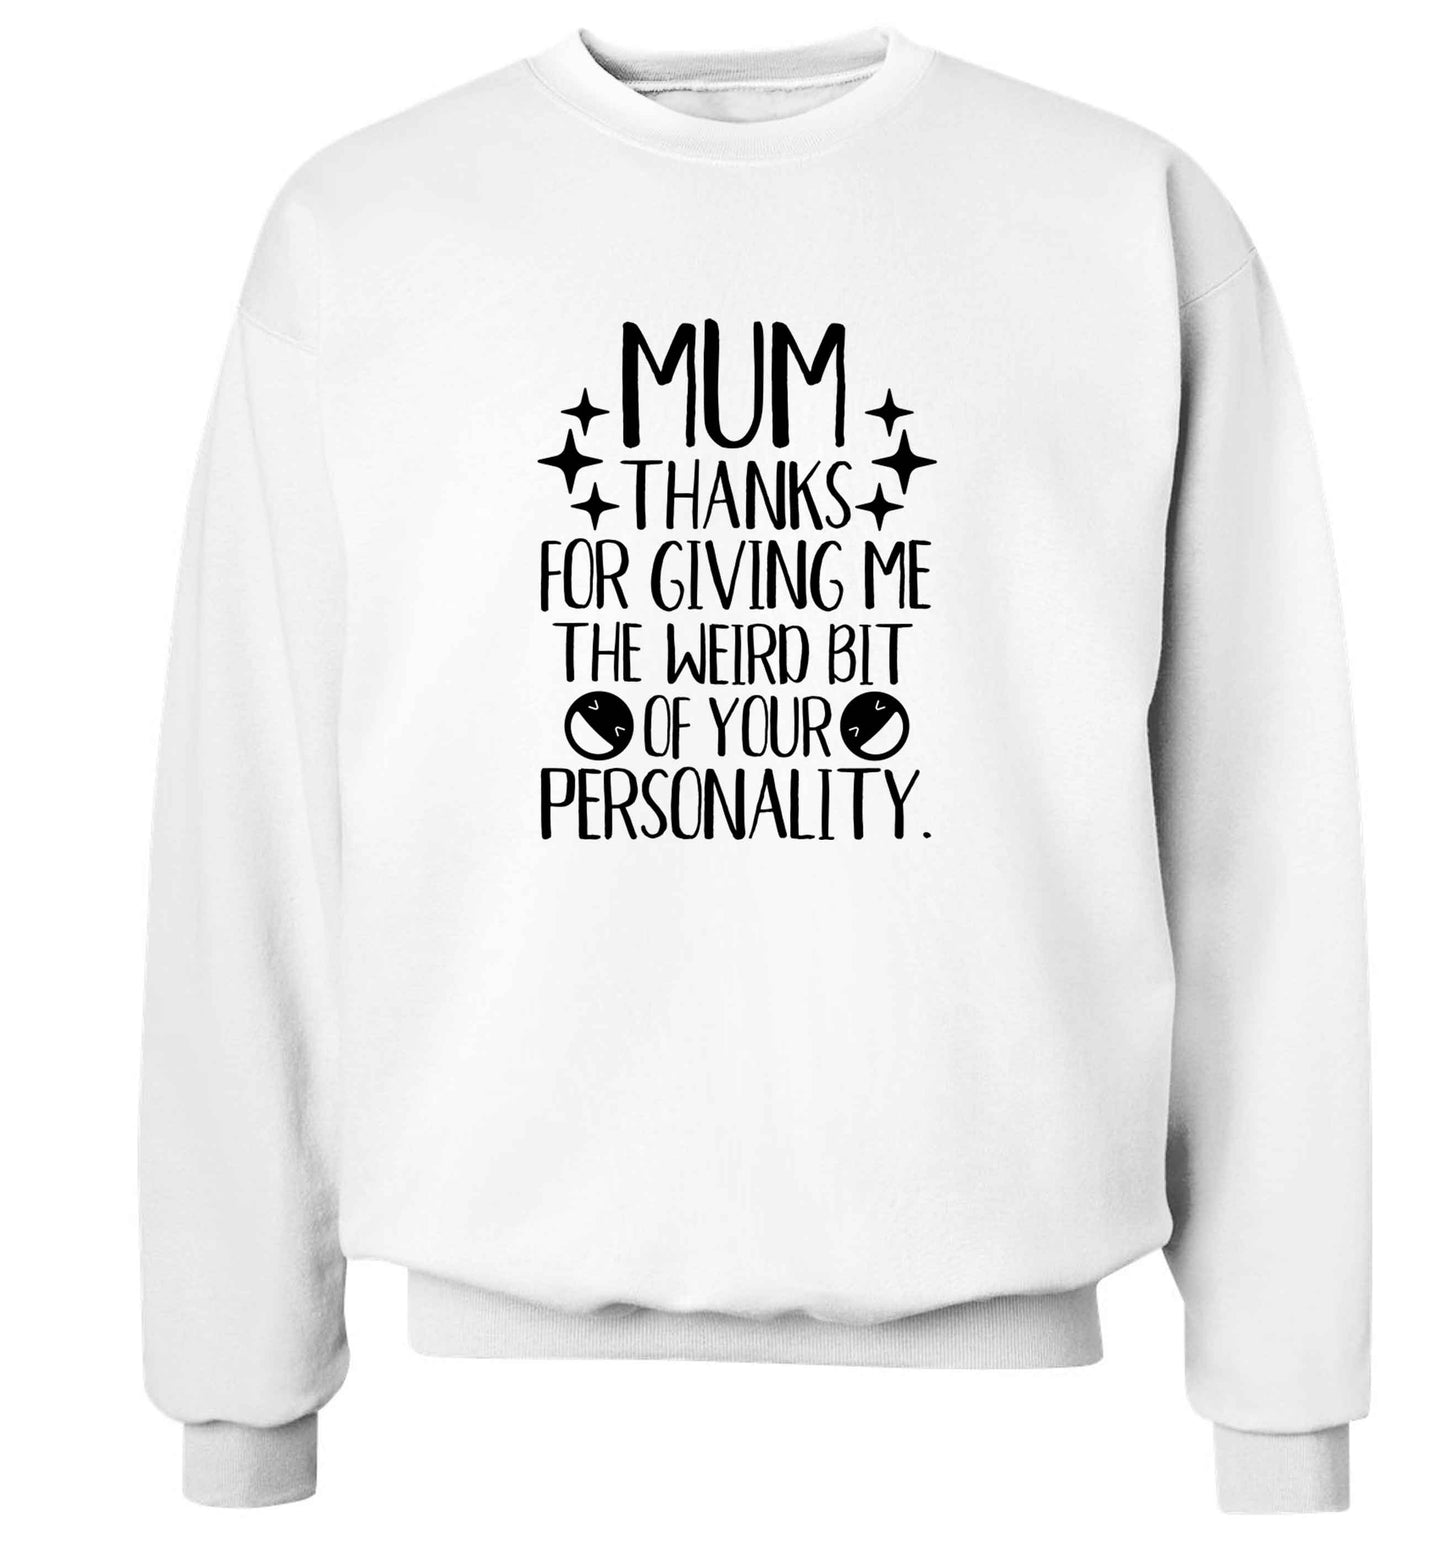 Mum, I love you more than halloumi and if you know me at all you know how deep that is adult's unisex white sweater 2XL